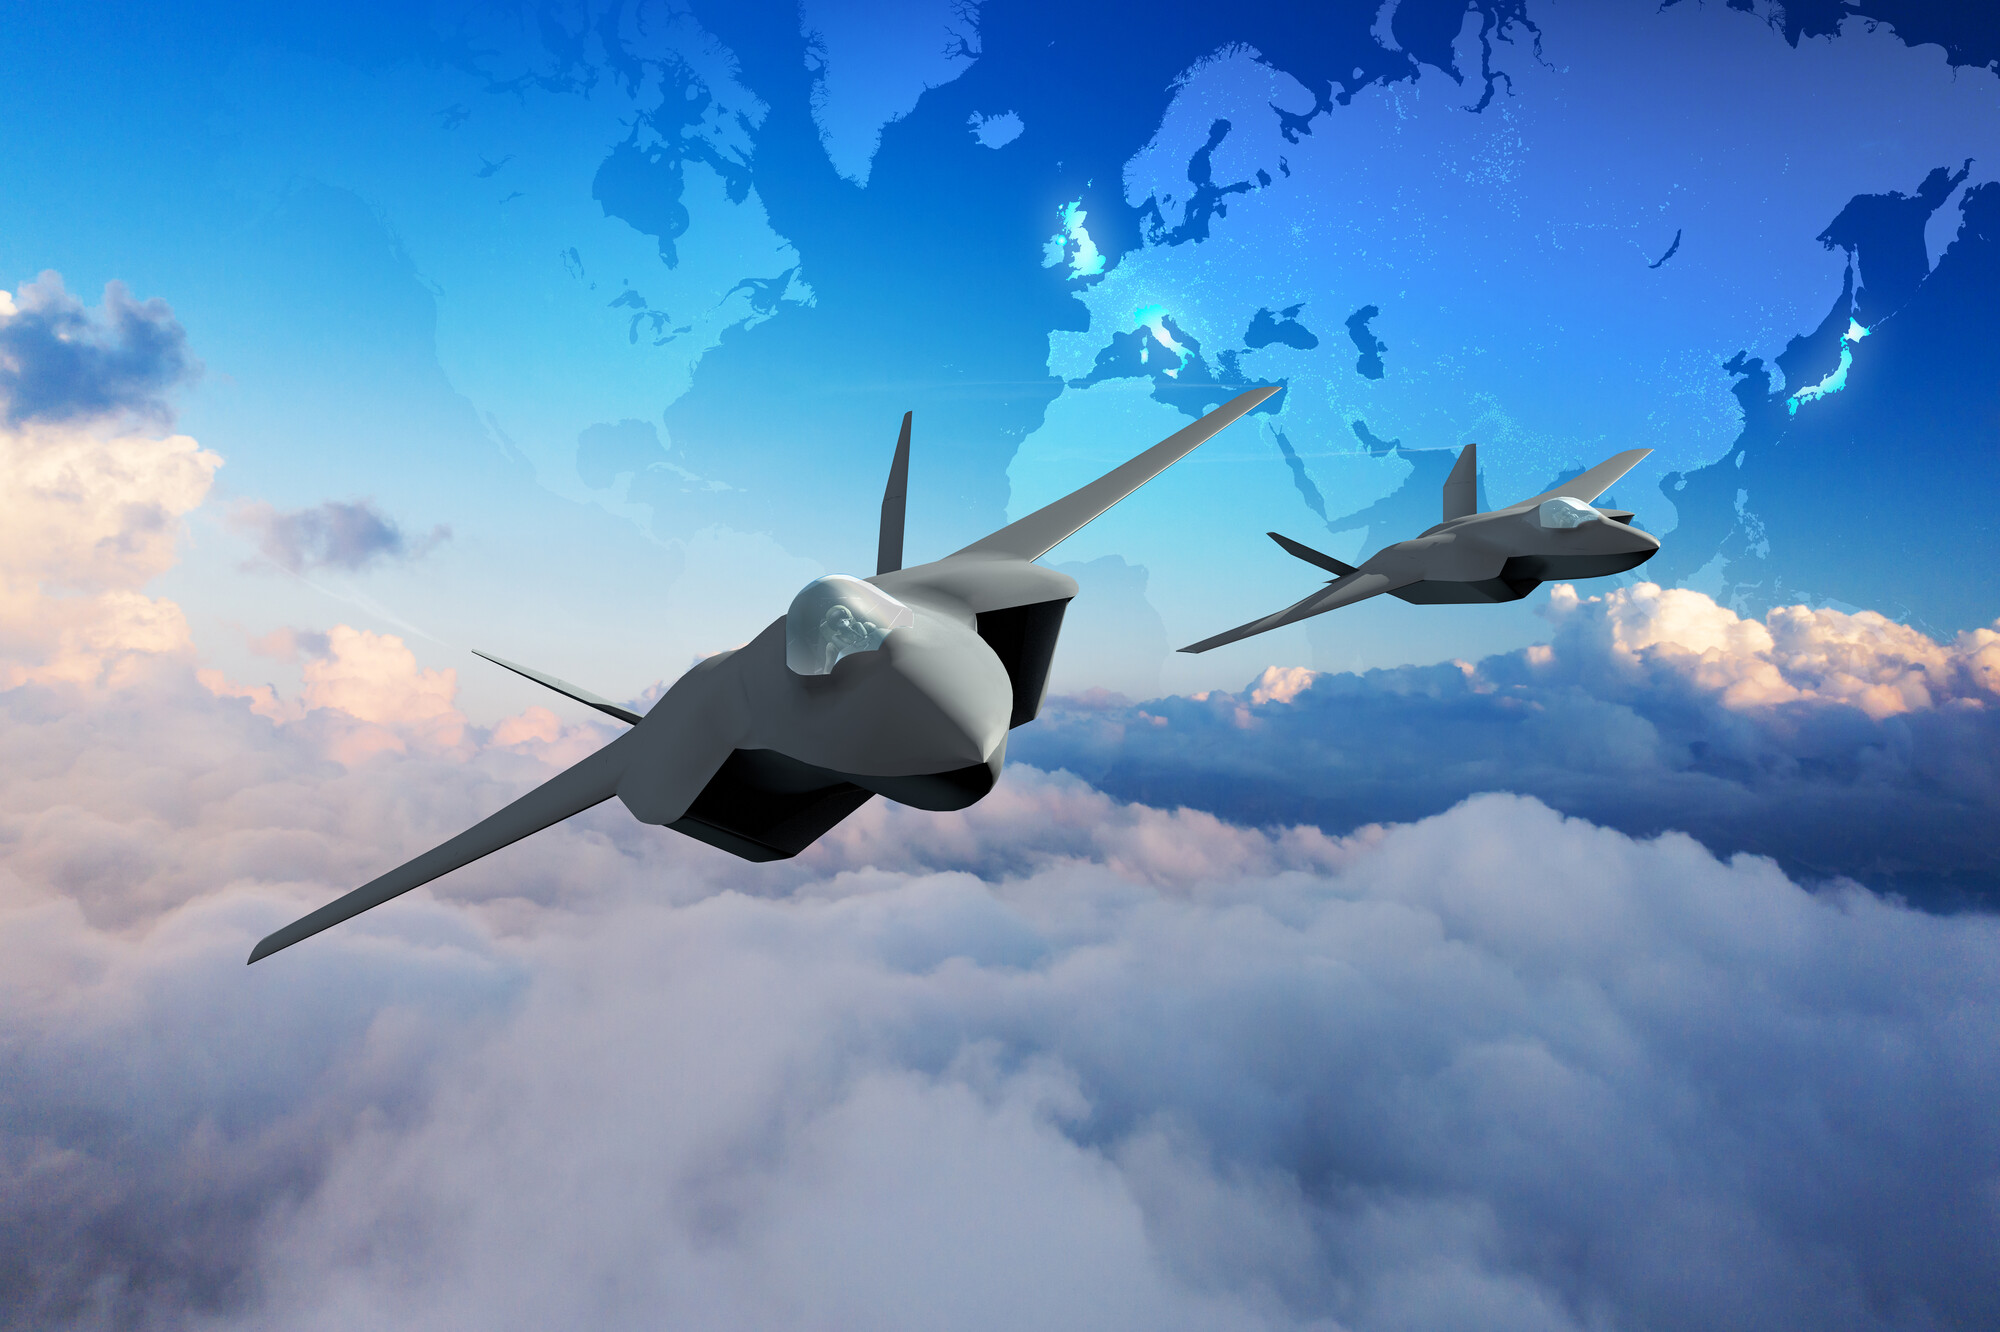 Image shows graphic of future fighter jets flying through clouds with superimposed map in the sky.